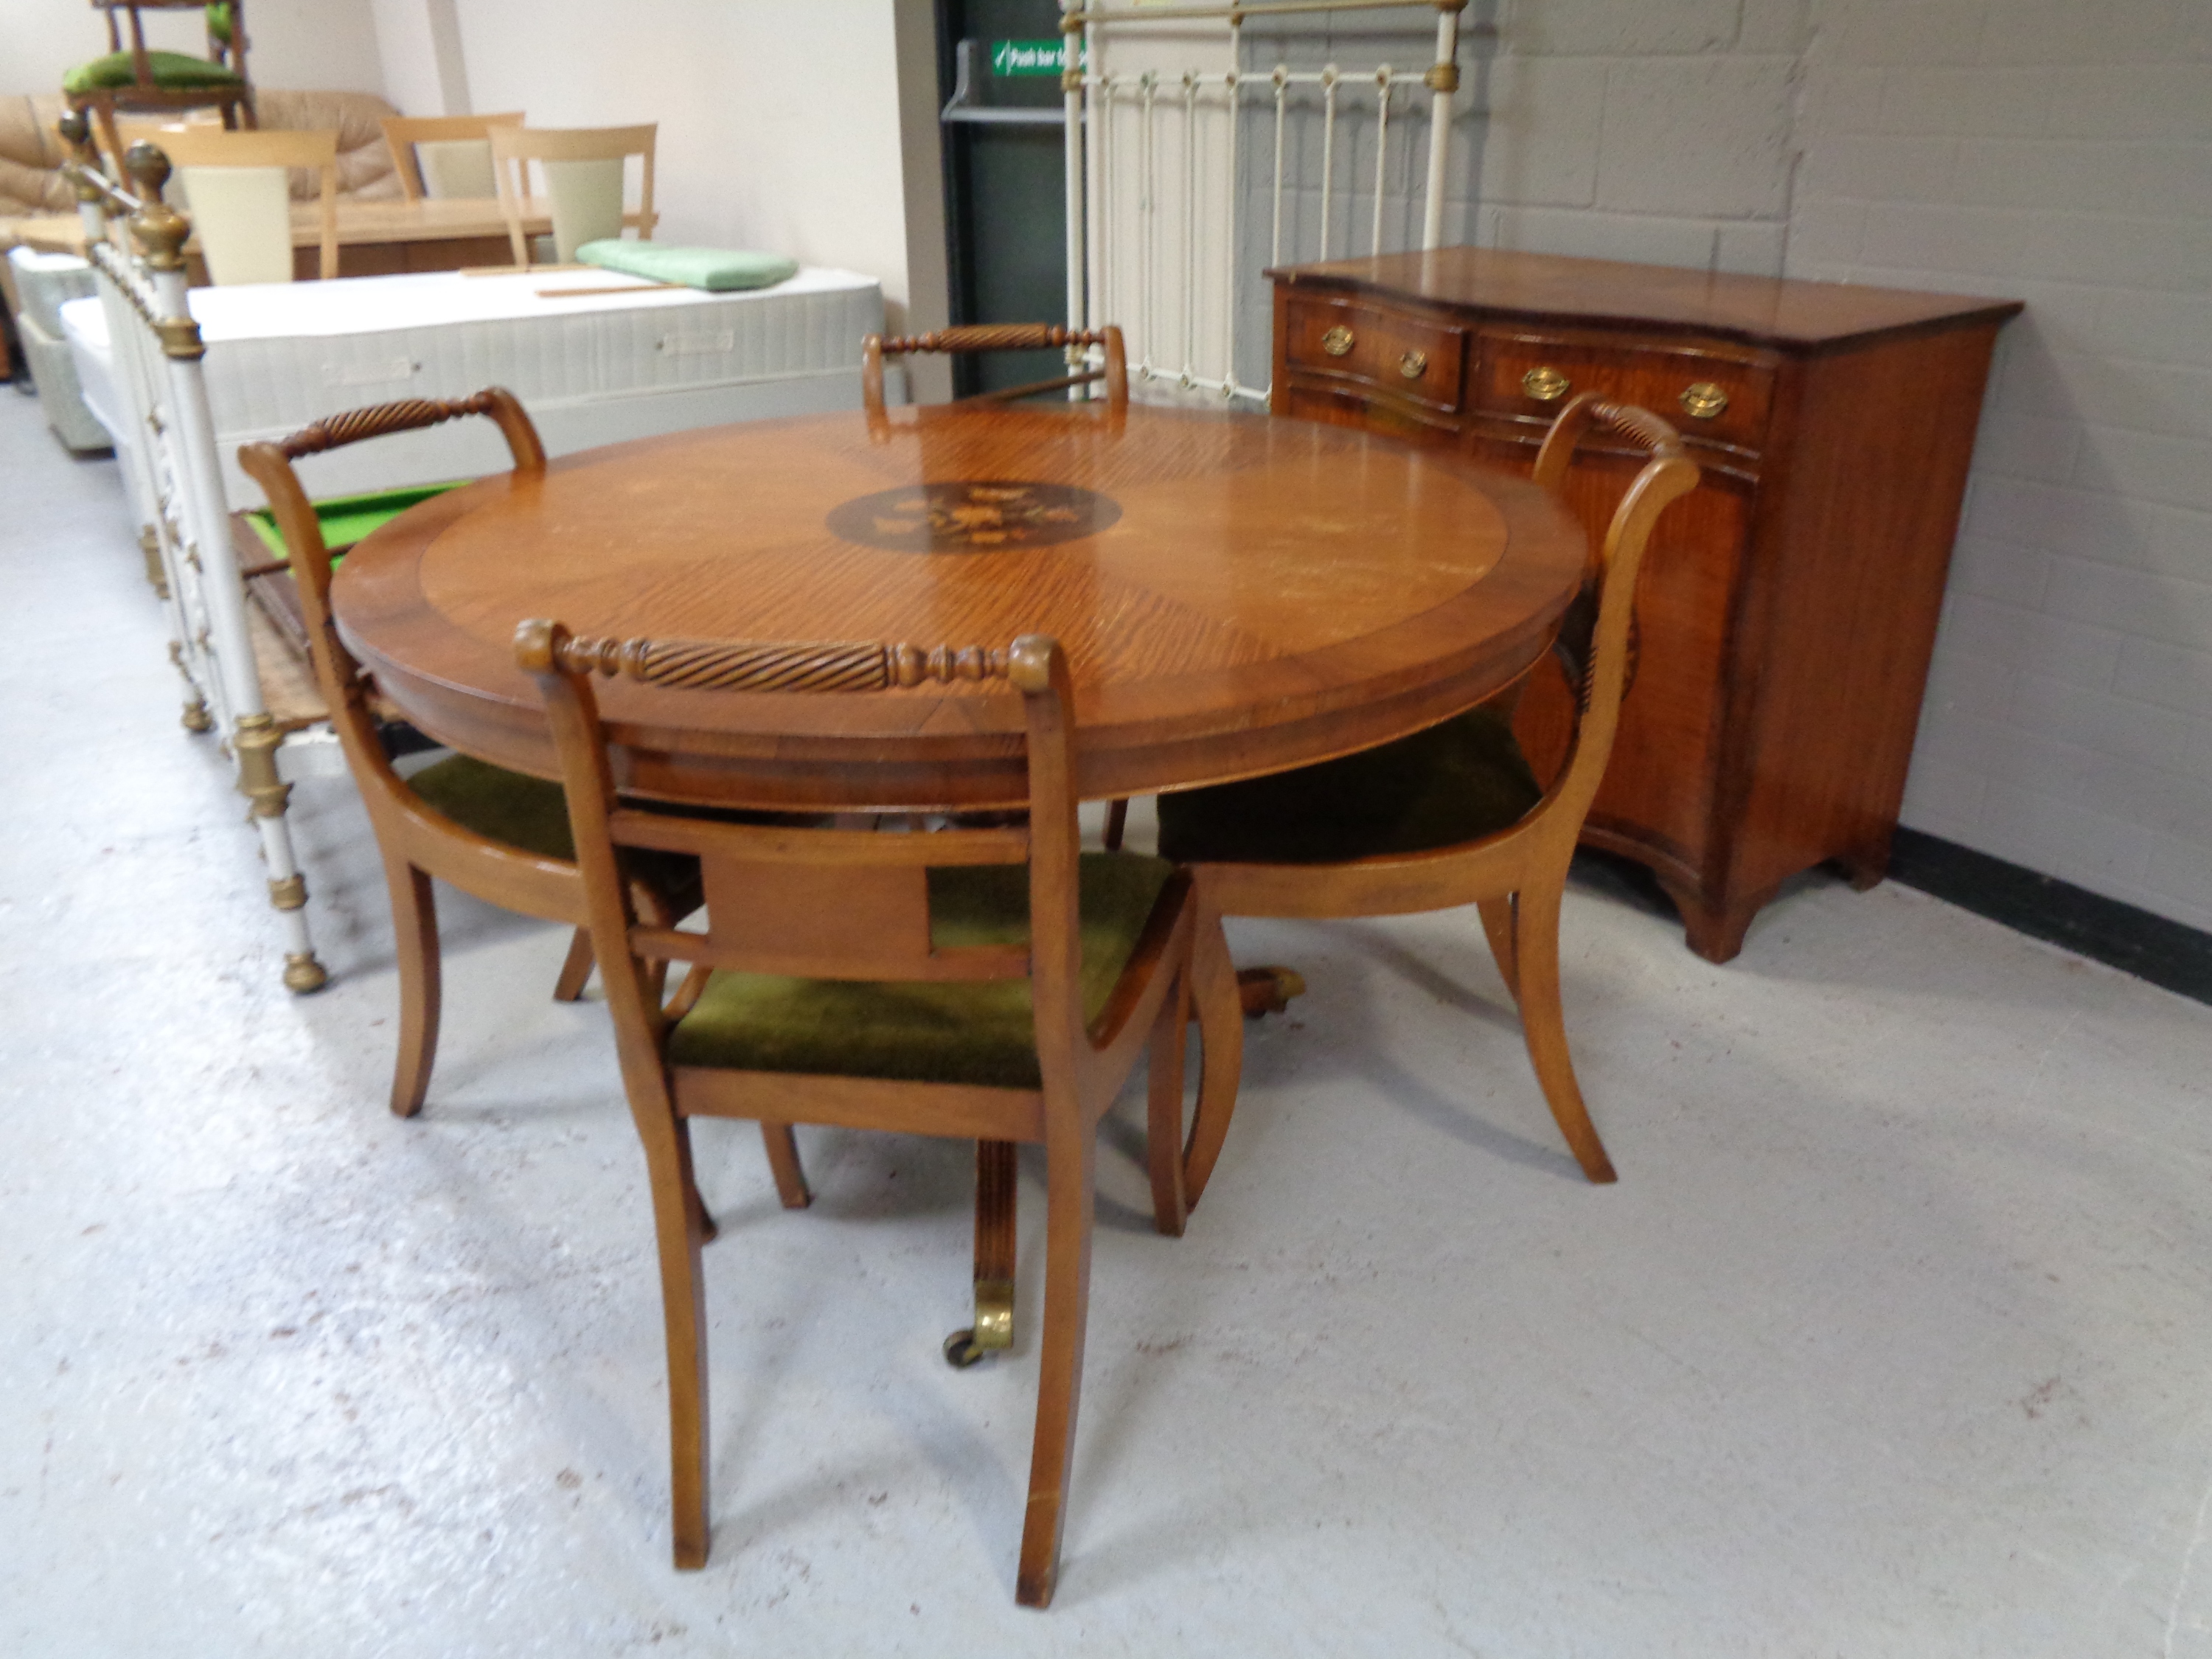 A six piece mahogany and cherry wood dining room suite - circular table,